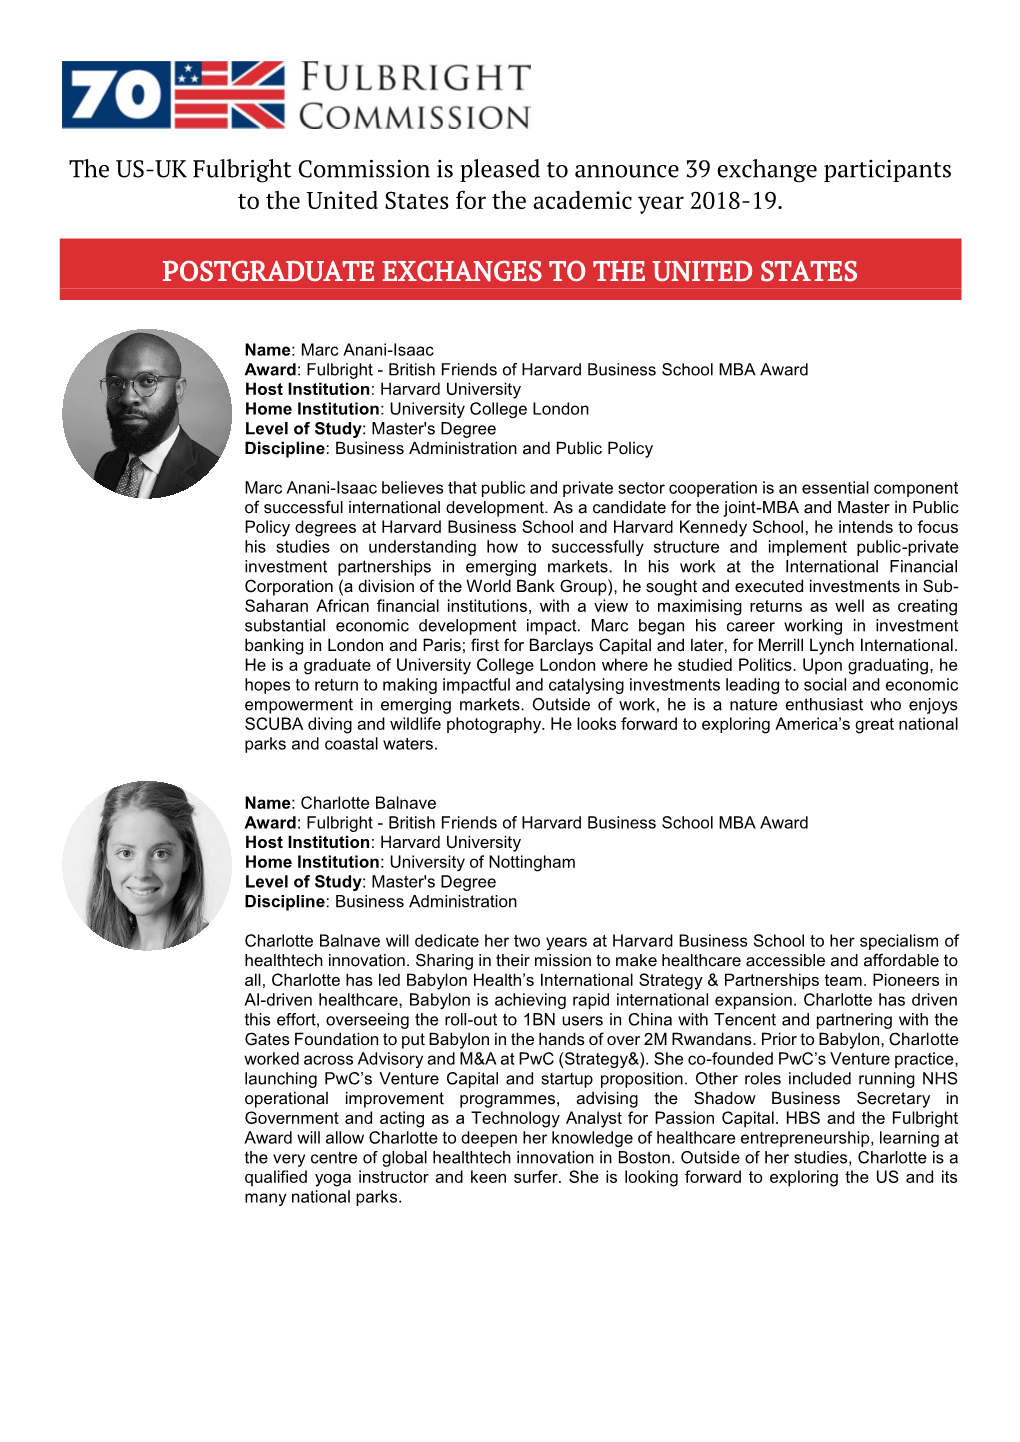 Postgraduate Exchanges to the United States